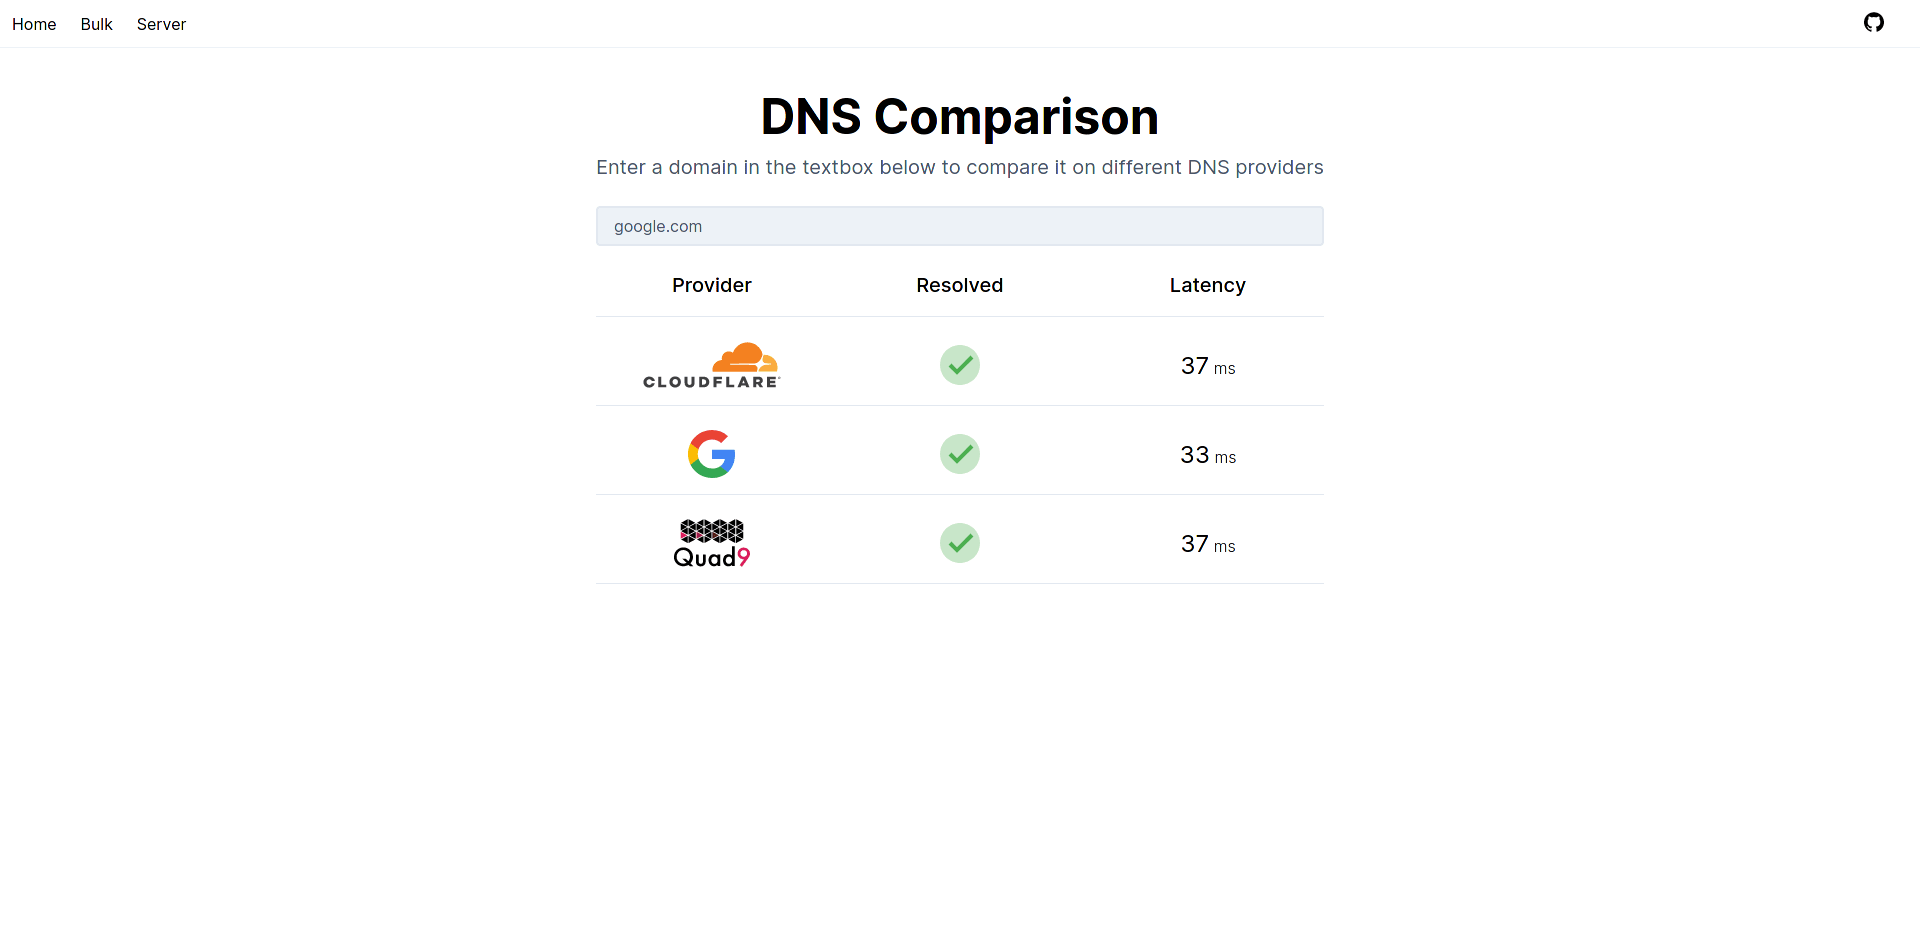 A website to compare the performance of major DNS providers when it comes to blocking criminal domains